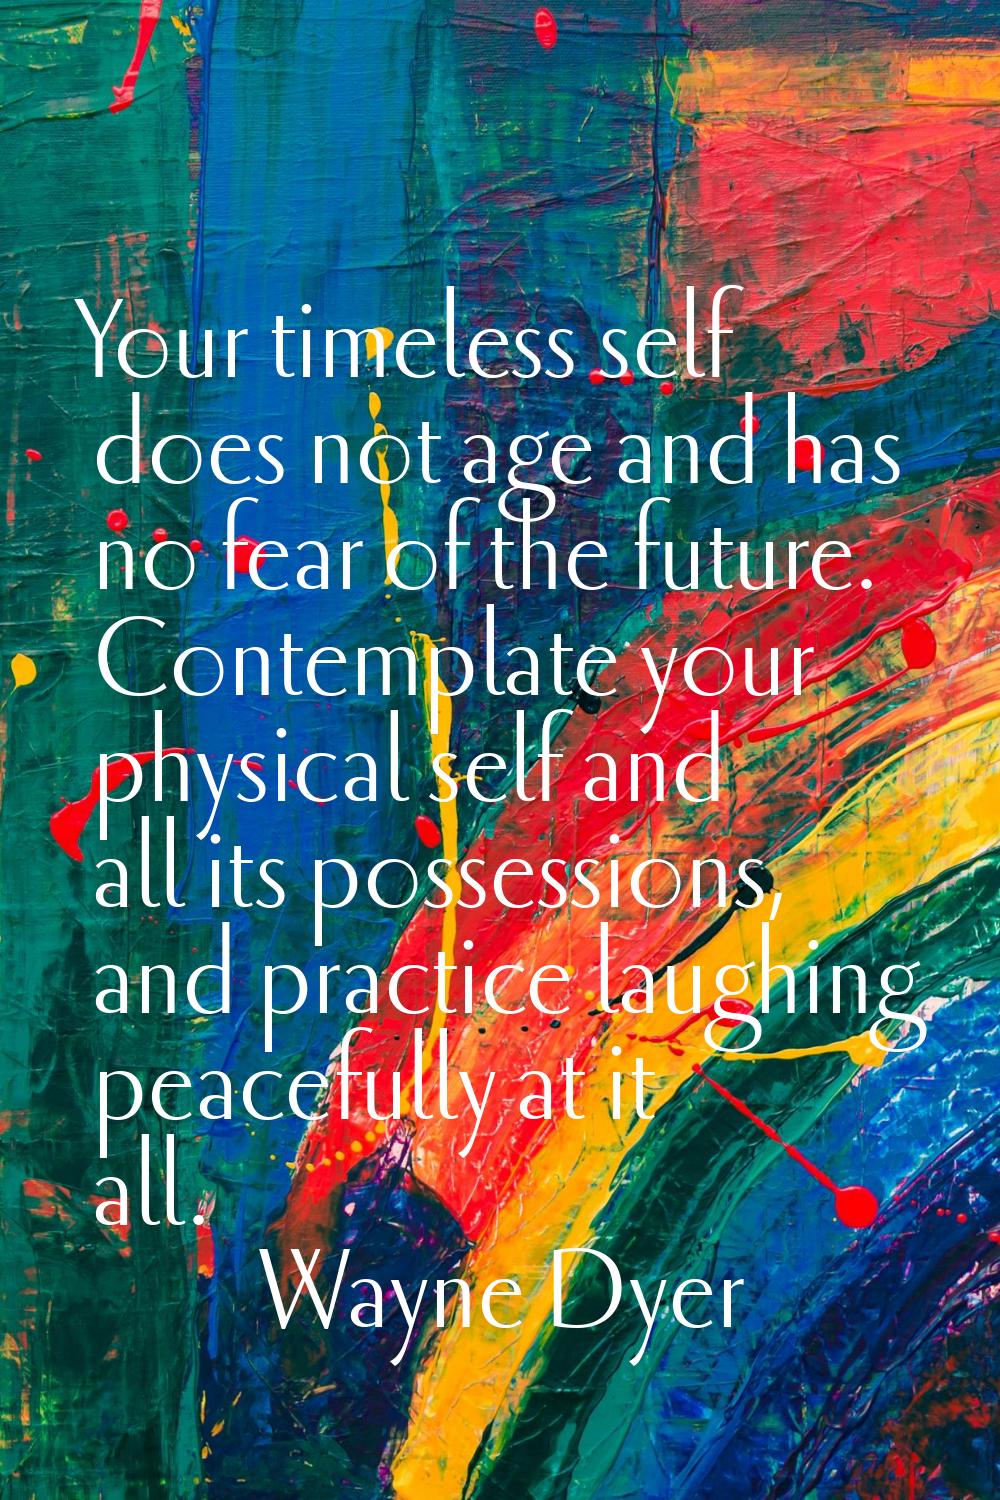 Your timeless self does not age and has no fear of the future. Contemplate your physical self and a